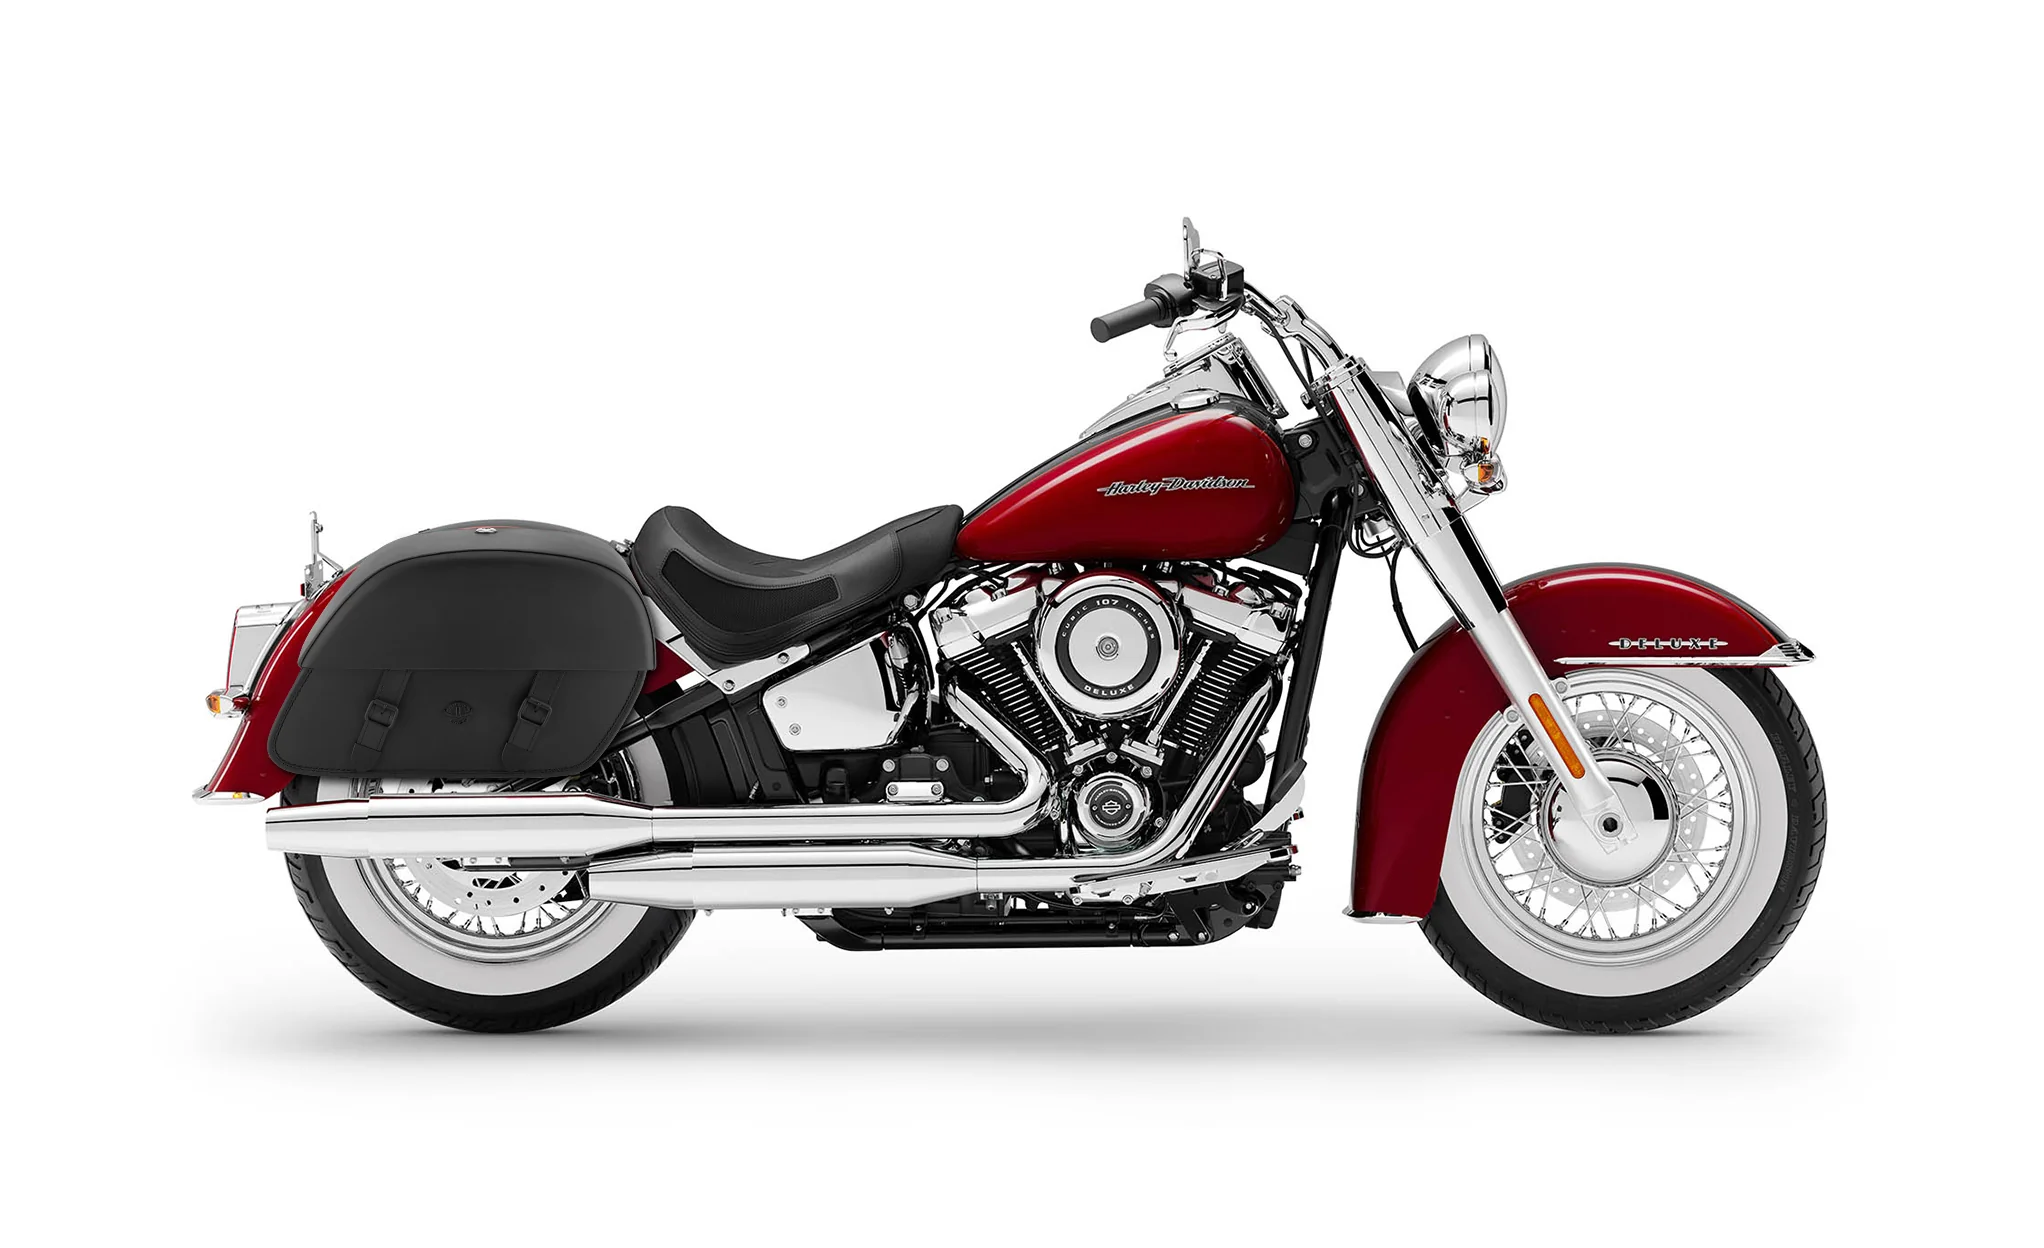 28L - Baelor Medium Quick Mount Motorcycle Saddlebags For Harley Softail Deluxe FLDE @expand